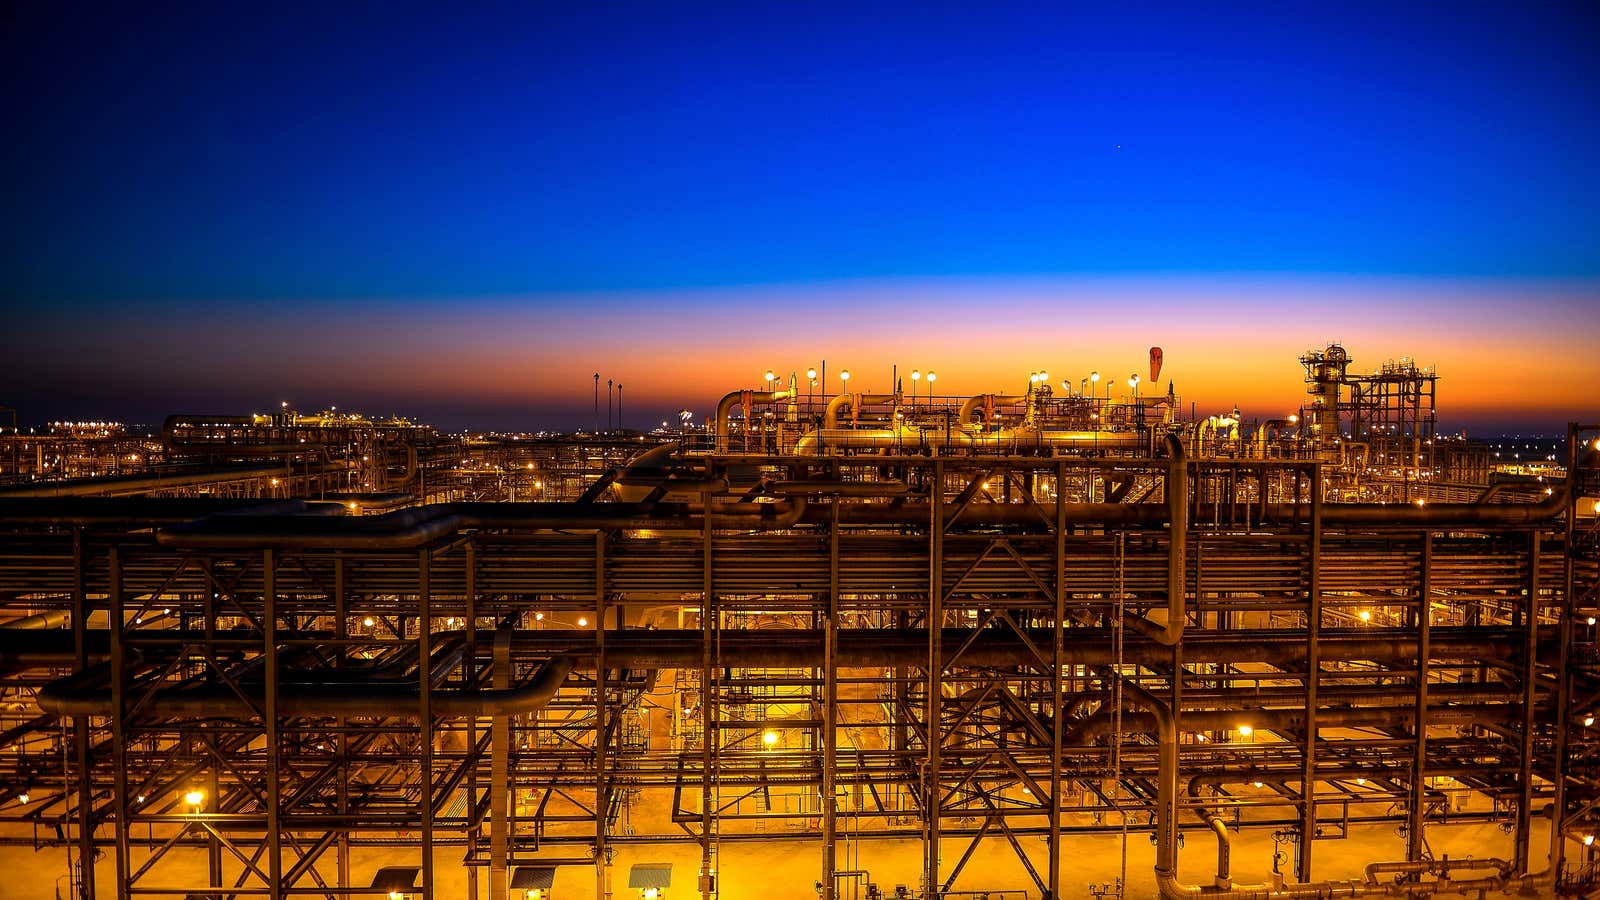 The sun is setting on Aramco’s big plans.